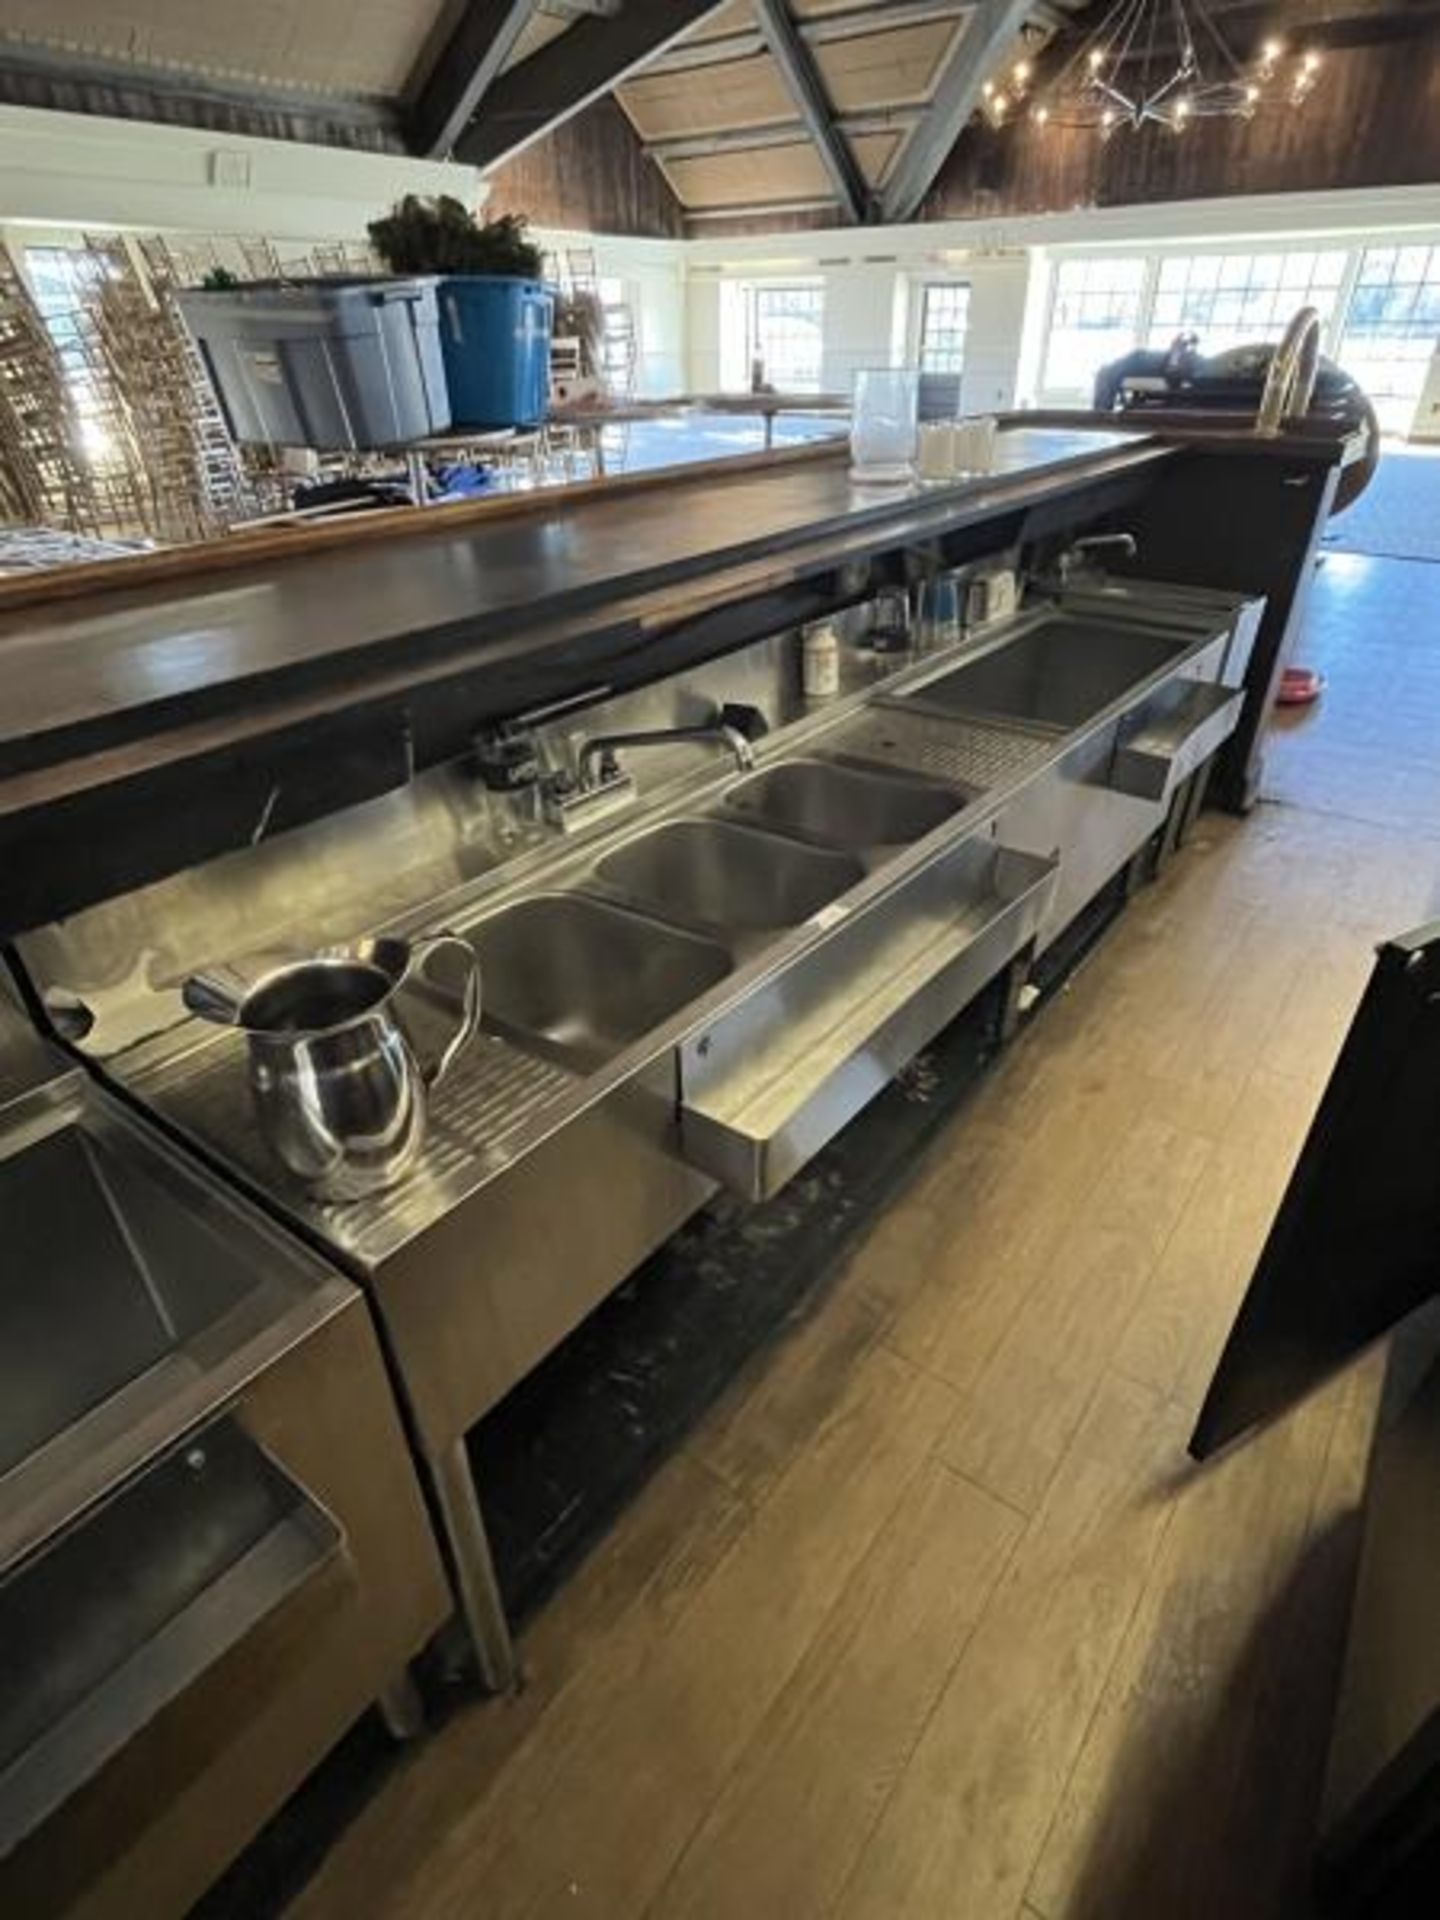 Krowne Back Bar 3-Bay Sink with Attached Ice Bin 95" Long x 23" Deep in Banquet room